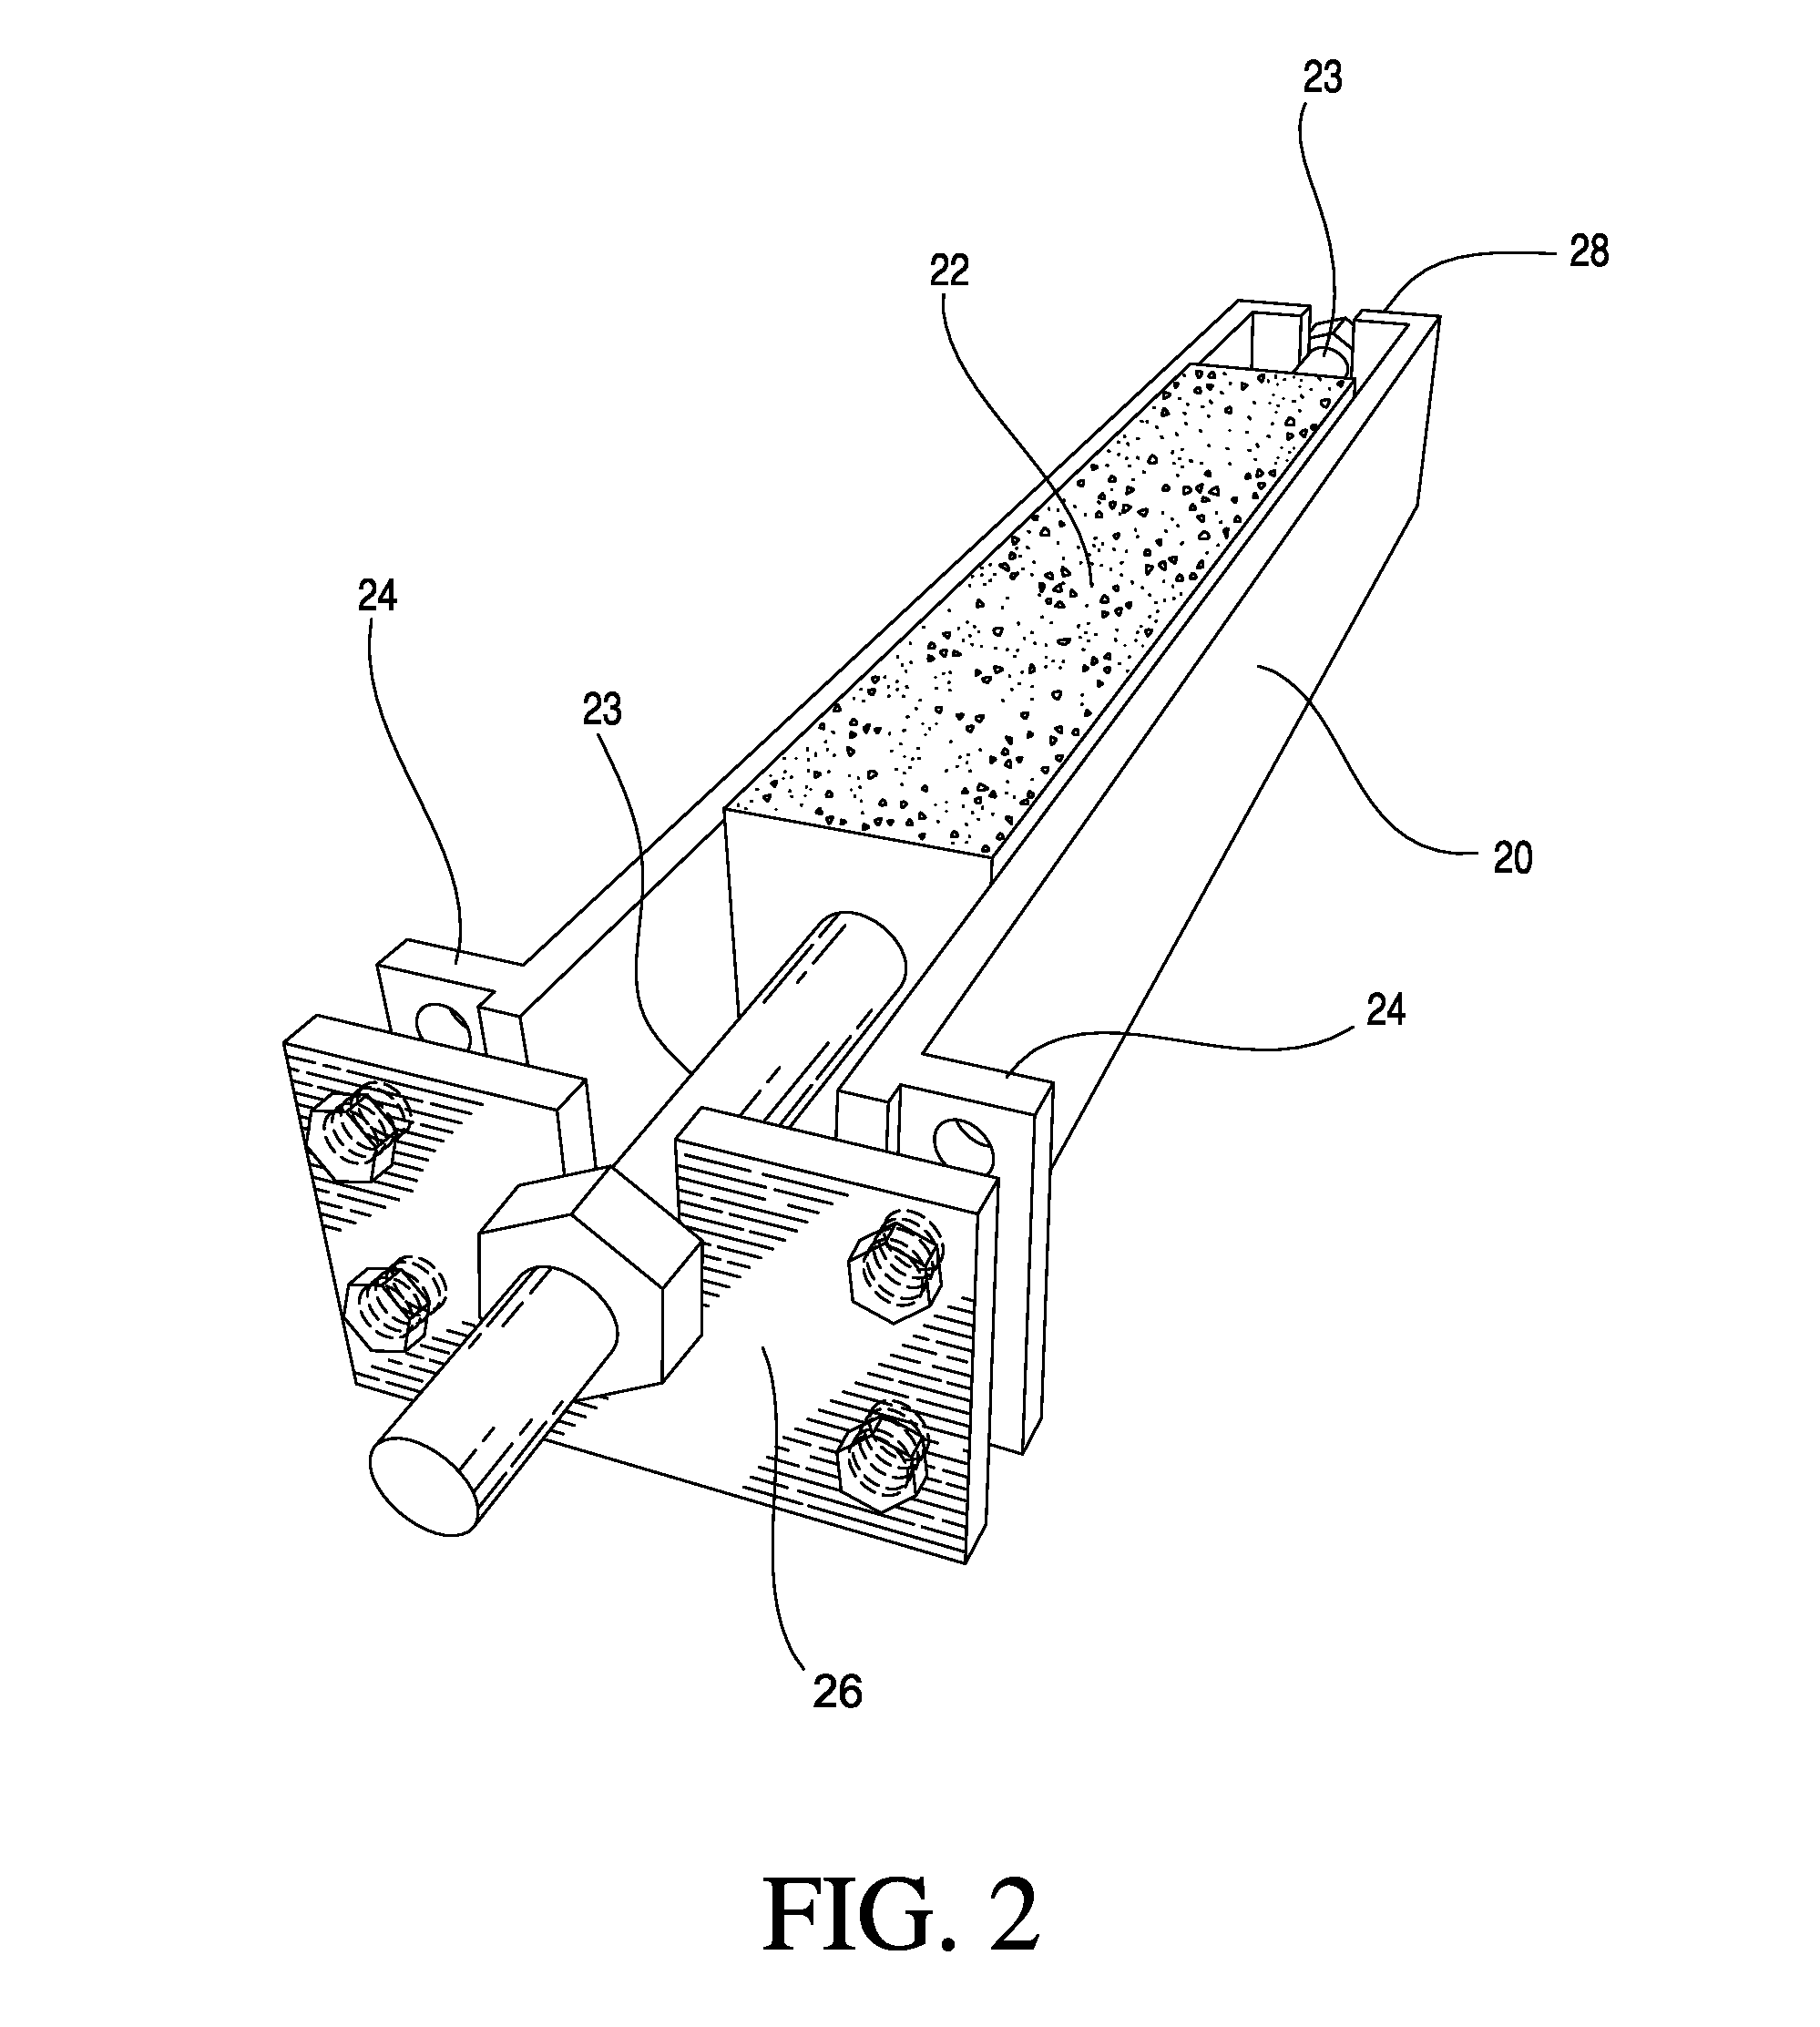 Apparatus for assessing durability of stressed fiber reinforced polymer (FRP) bars